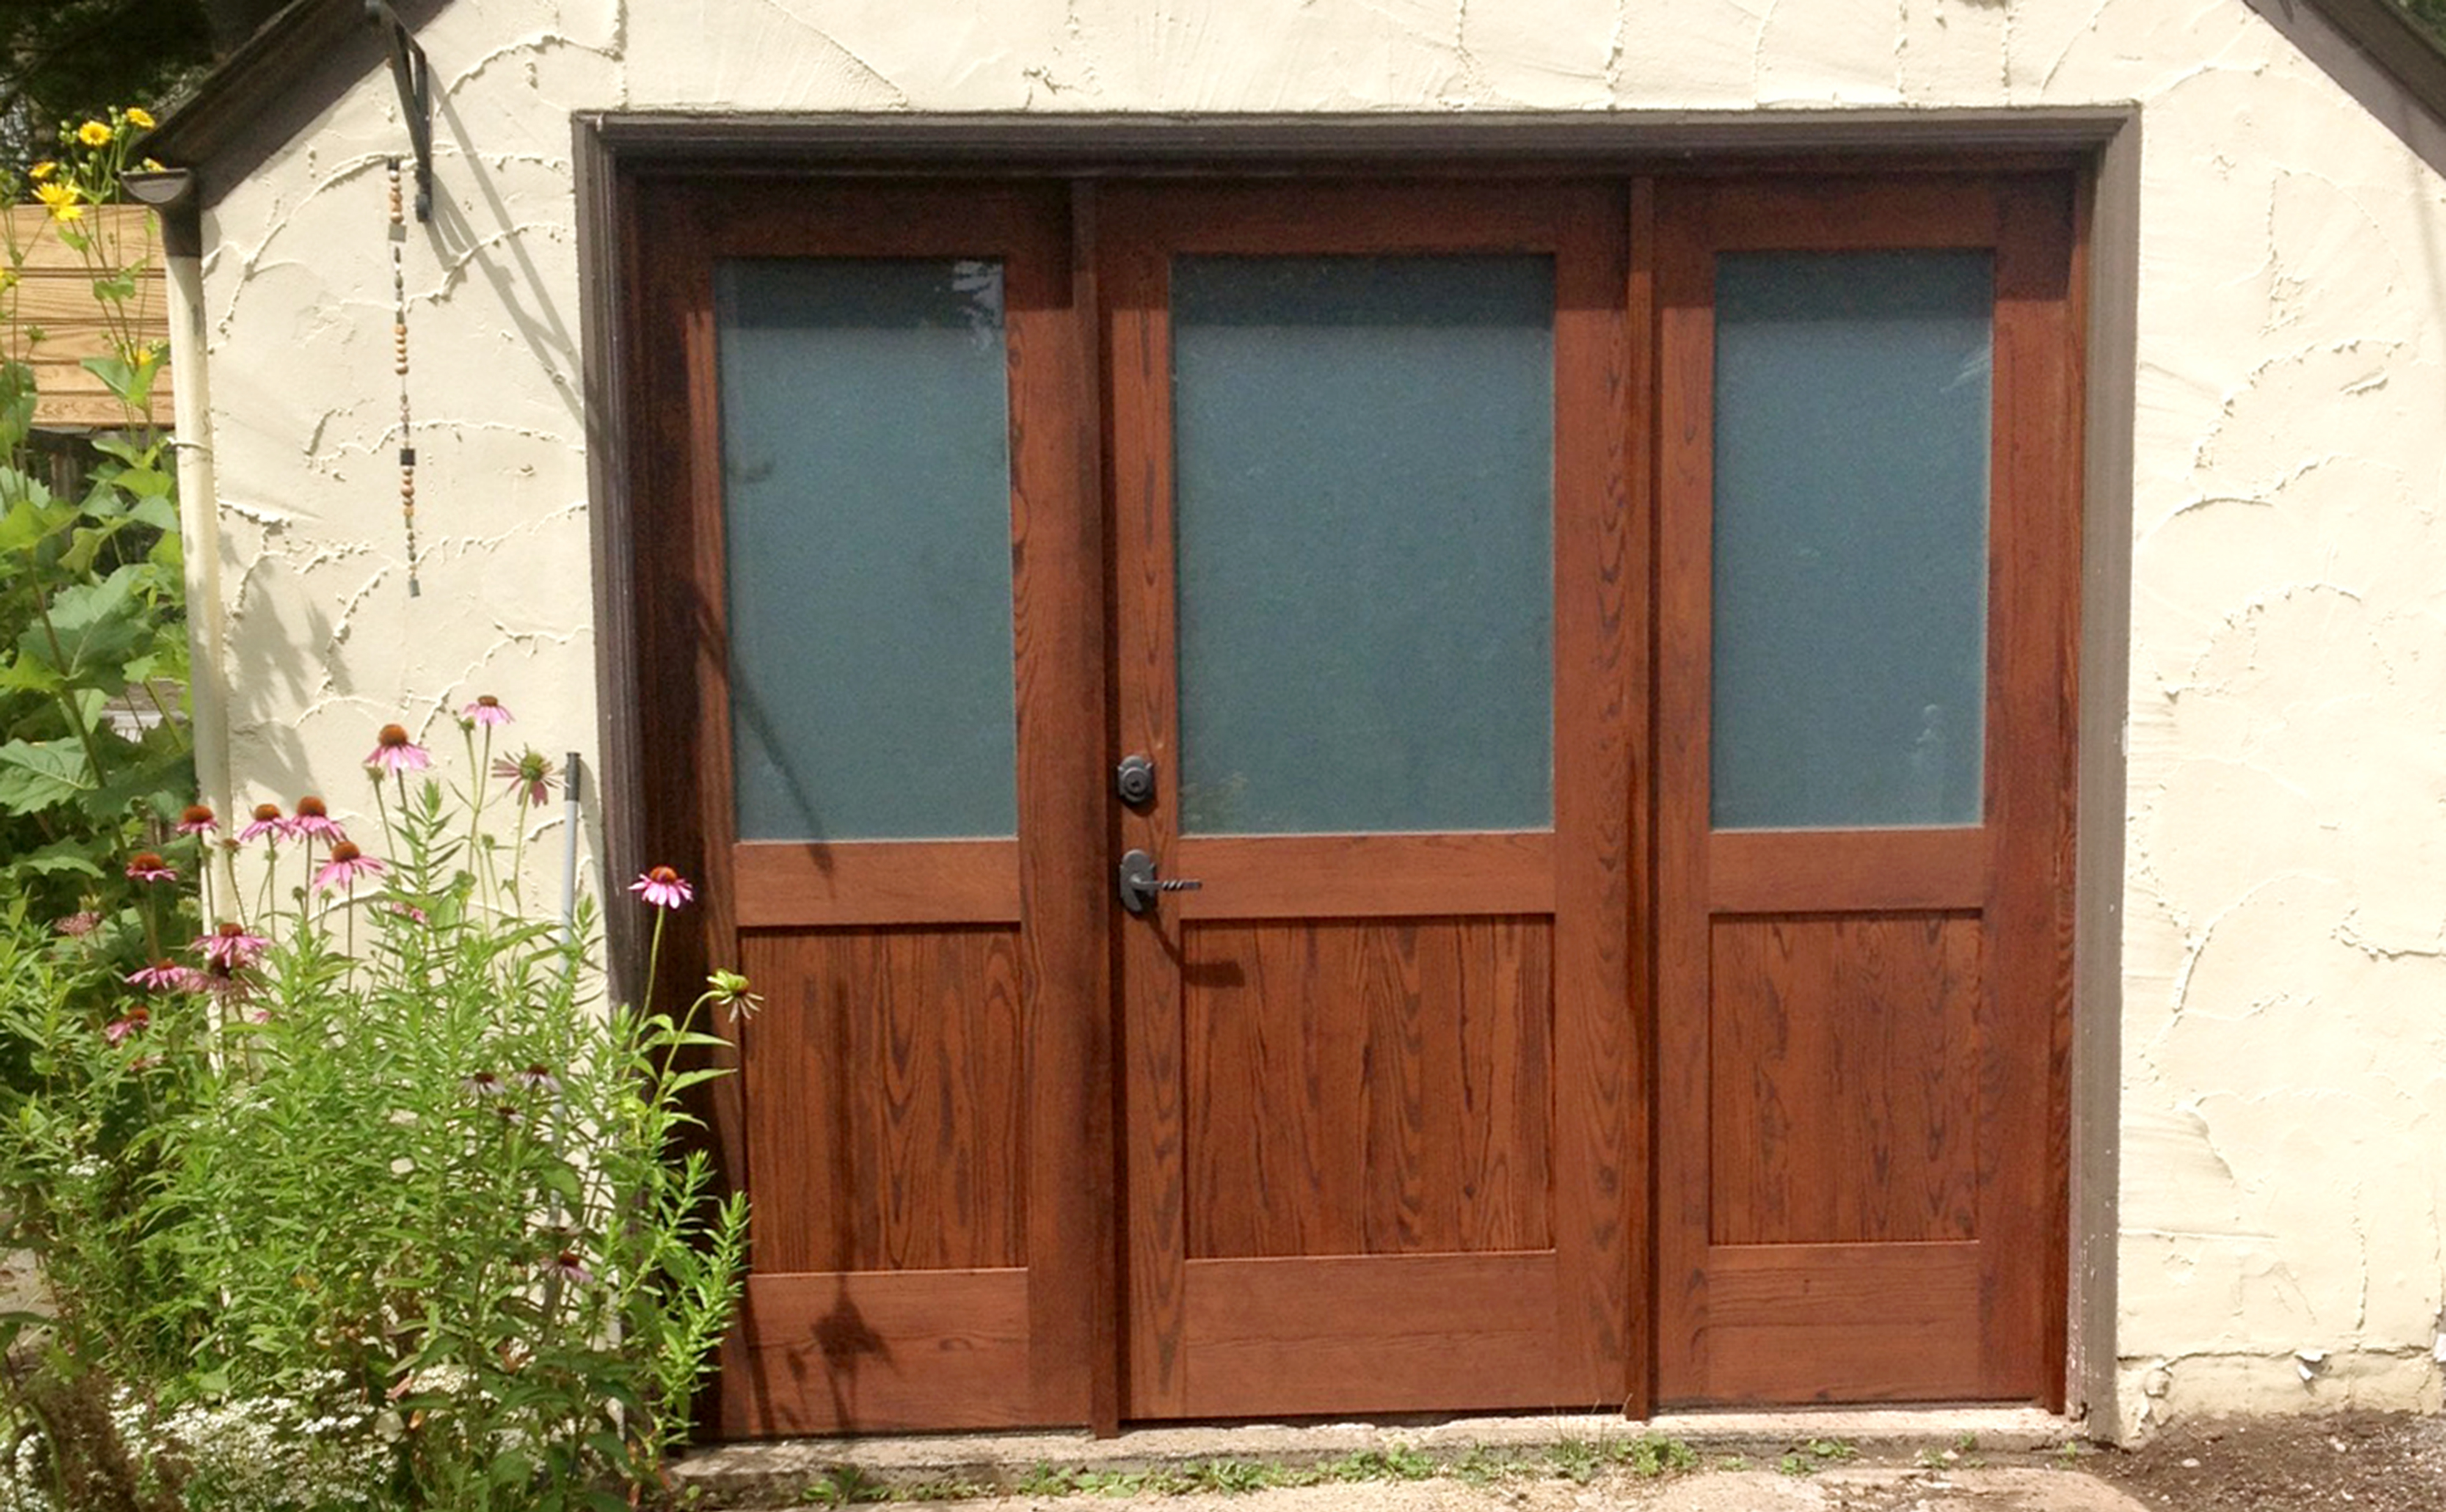 Thermally modified wood door